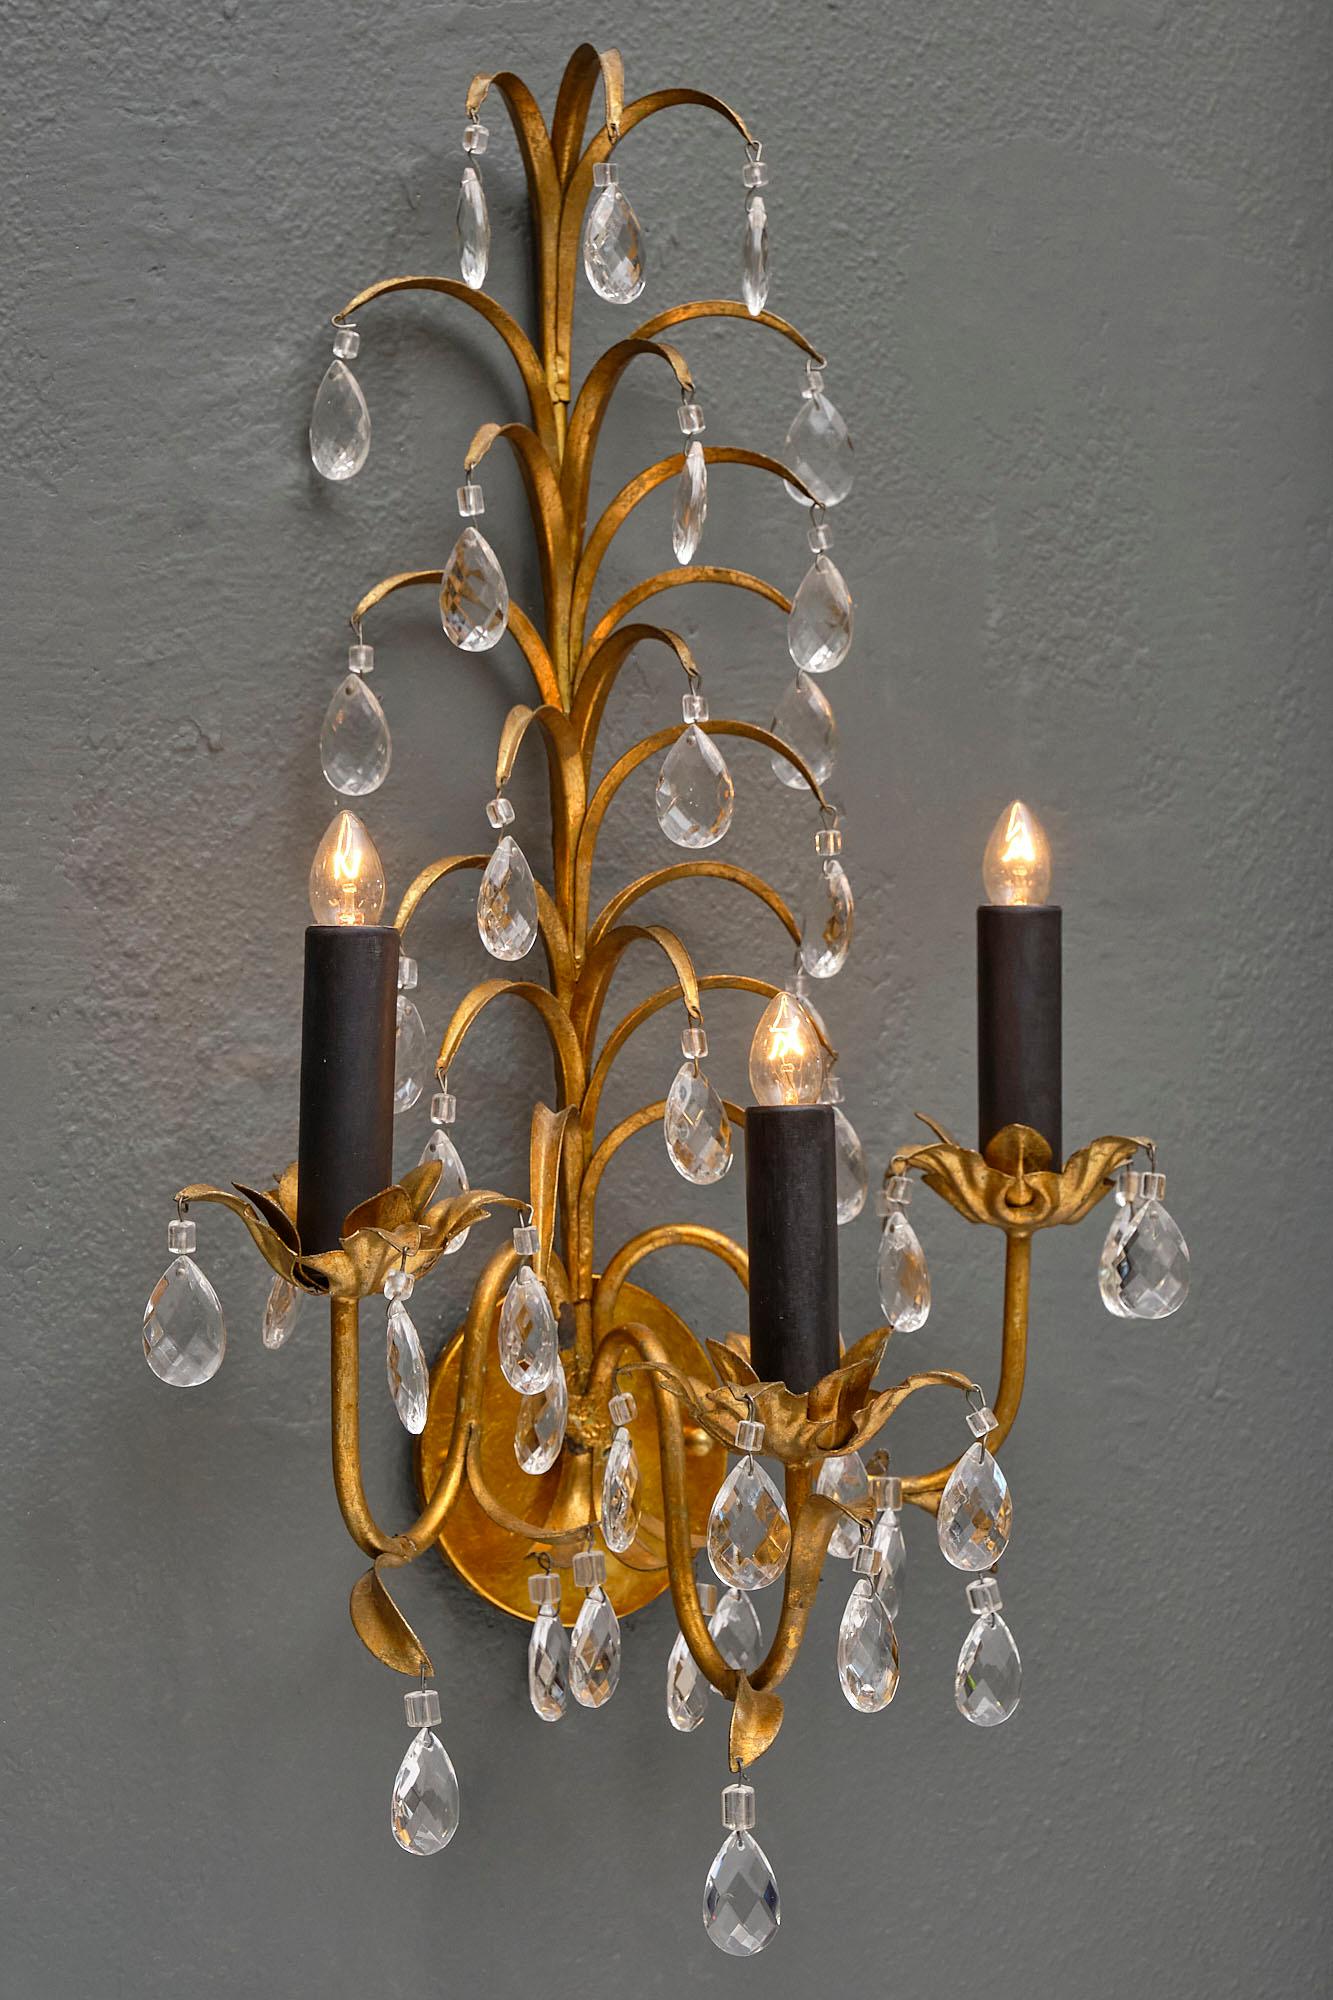 Pair of vintage French crystal sconces rewired to US standards. We love the cut crystal and gold leaf tole of this elegant pair.